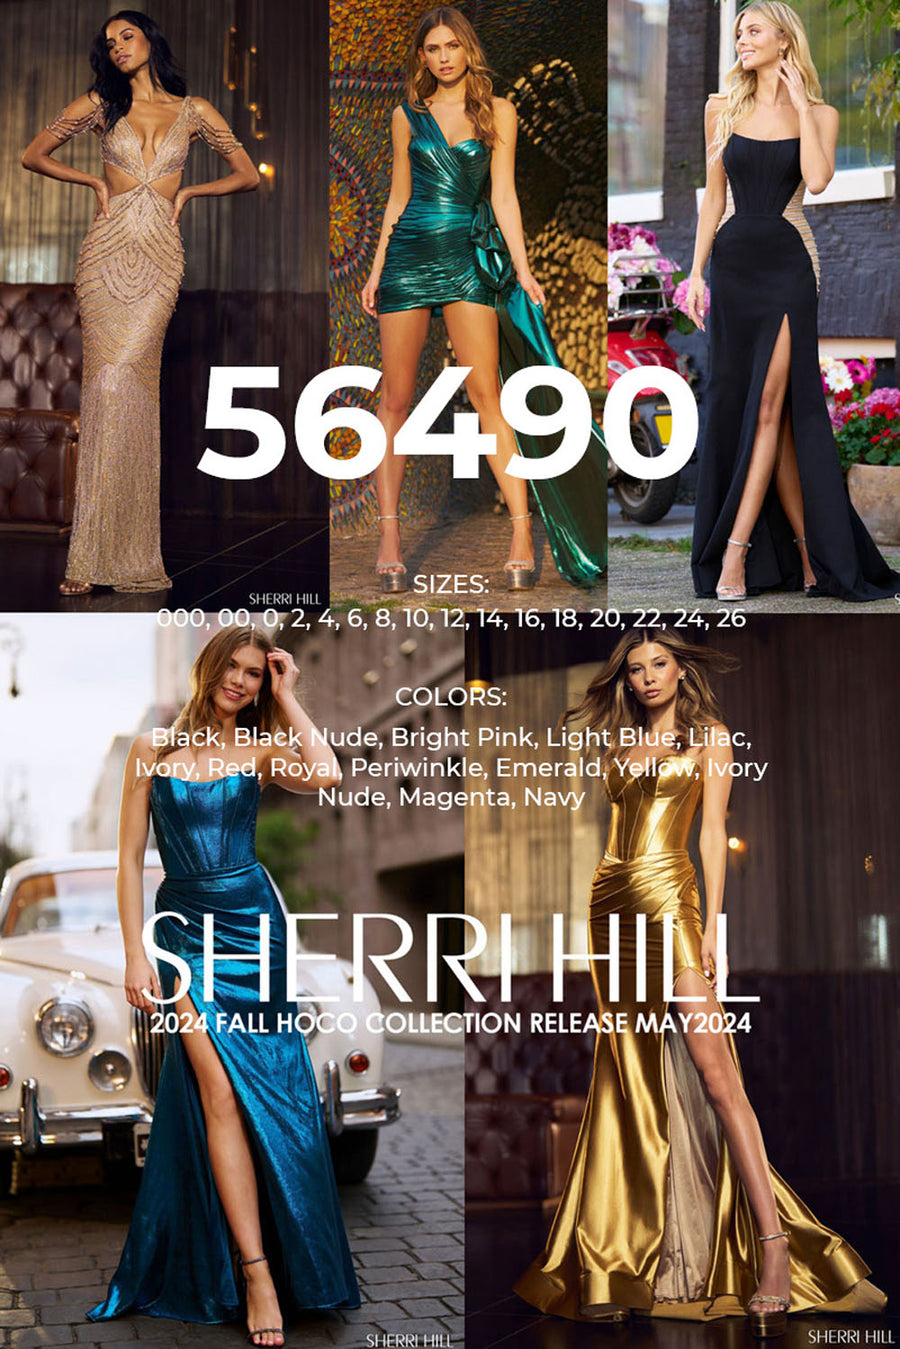 Sherri Hill 56490 prom dress images.  Sherri Hill 56490 is available in these colors: Black, Black Nude, Bright Pink, Light Blue, Lilac, Ivory, Red, Royal, Periwinkle, Emerald, Yellow, Ivory Nude, Magenta, Navy.